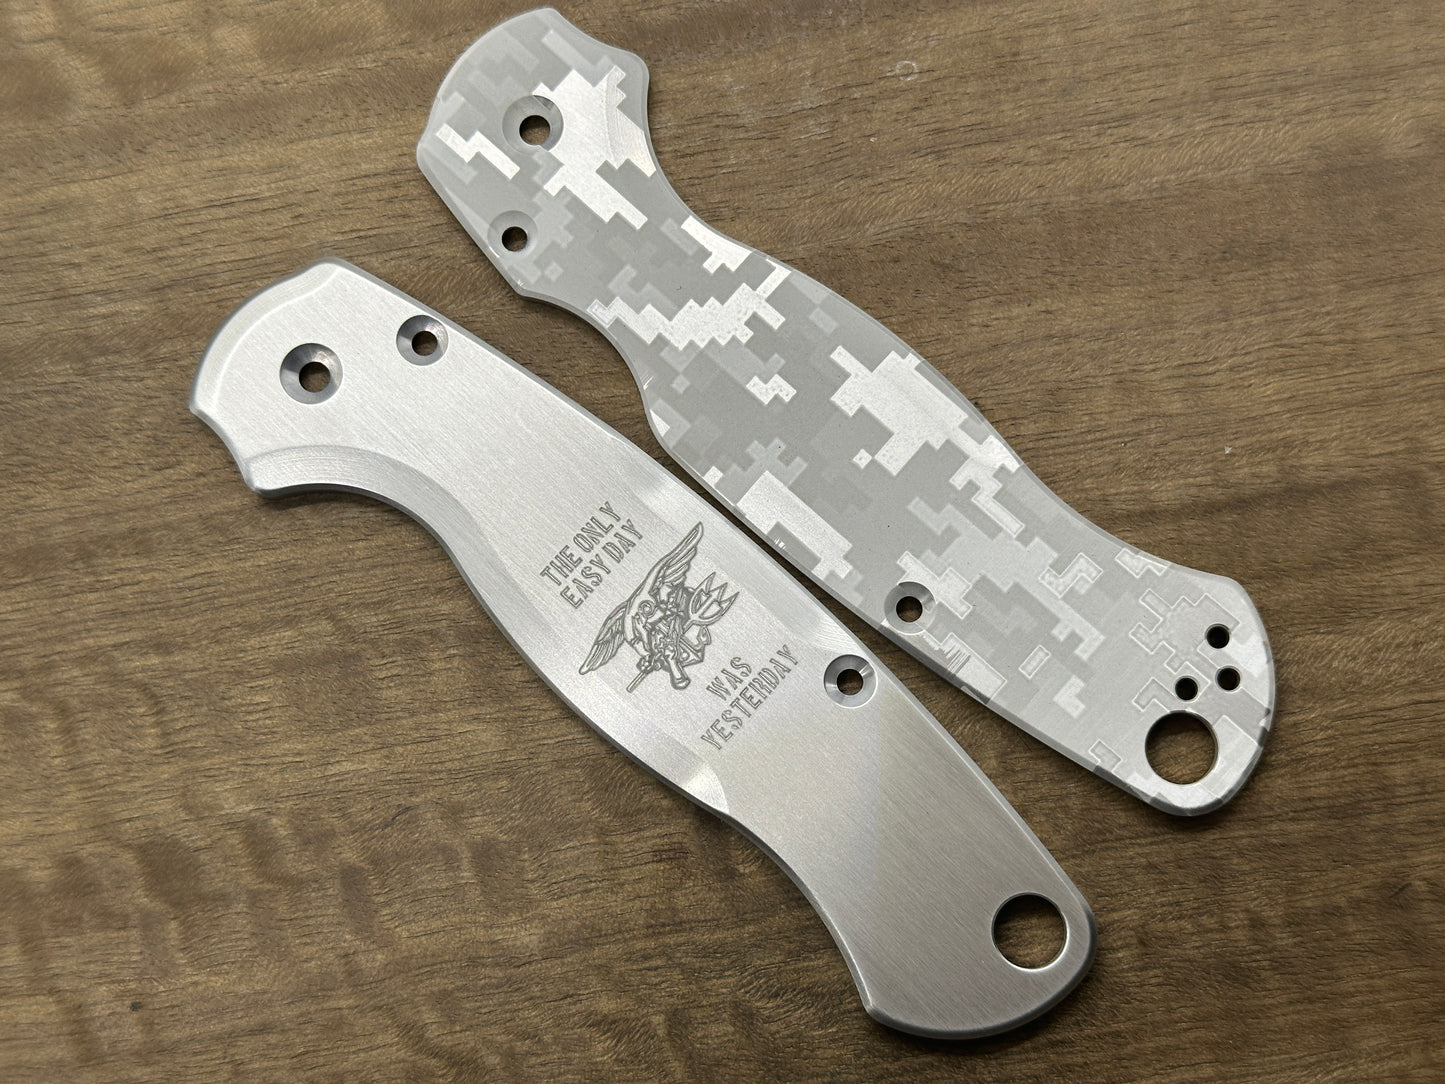 US NAVY Seals The only easy day was yesterday Aluminum scales for Spyderco Paramilitary 2 PM2